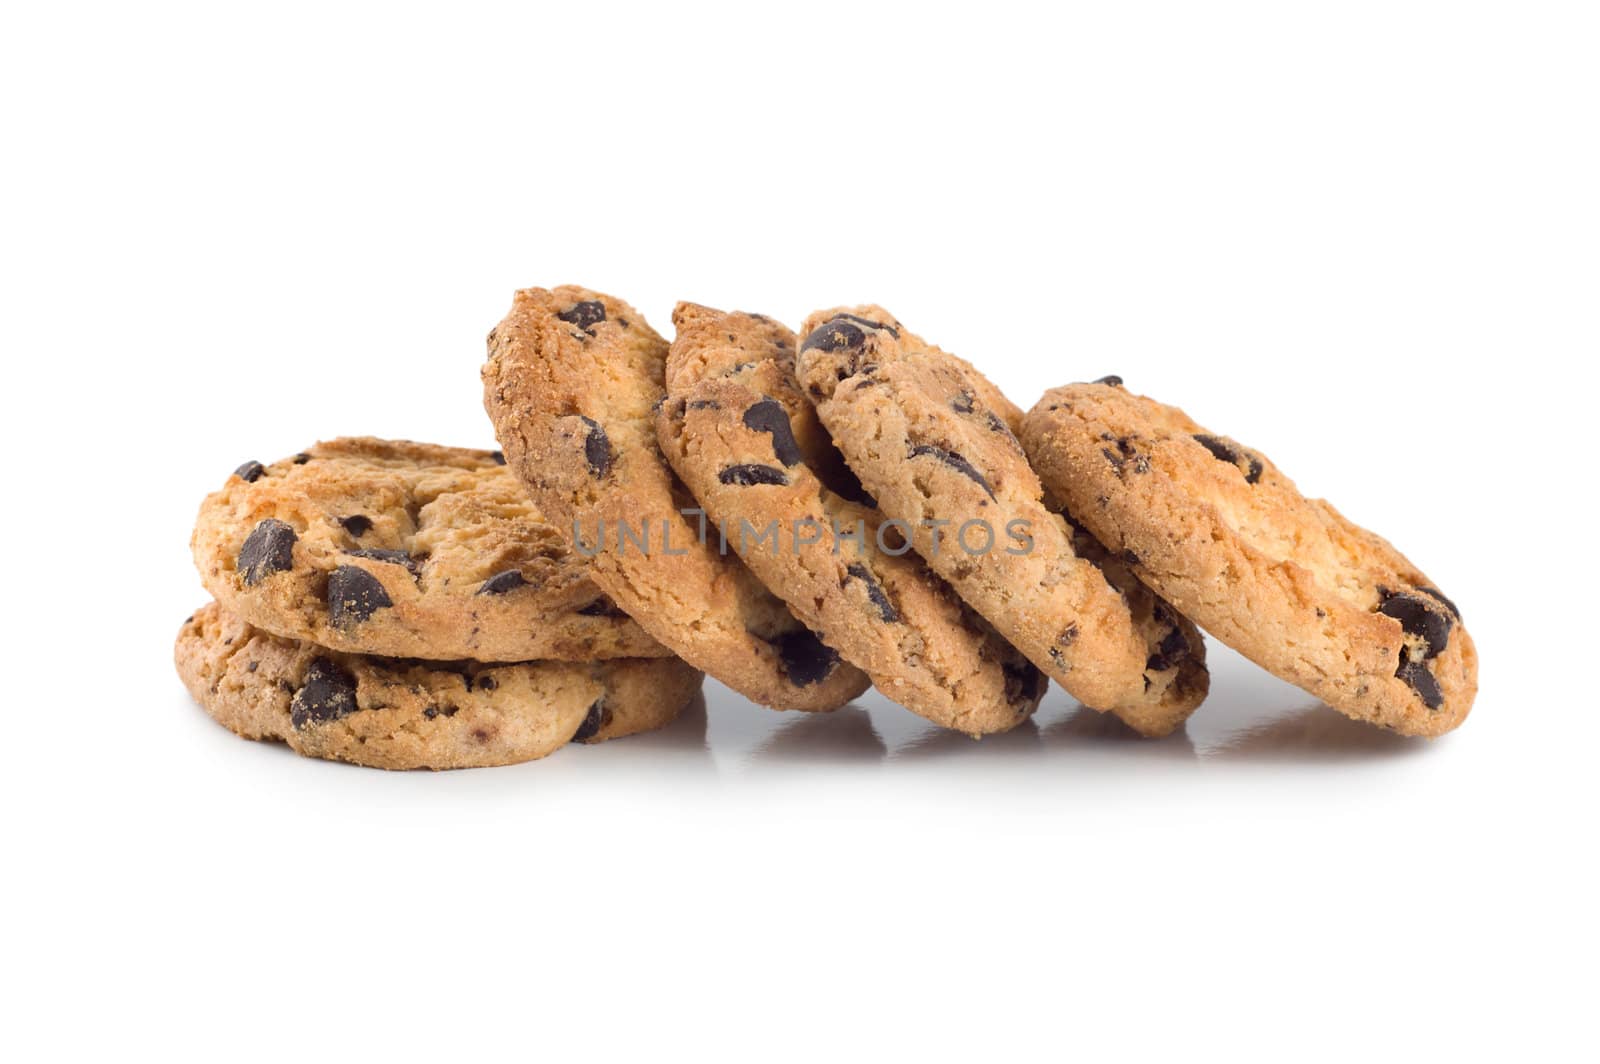 Chocolate chip cookies by Givaga